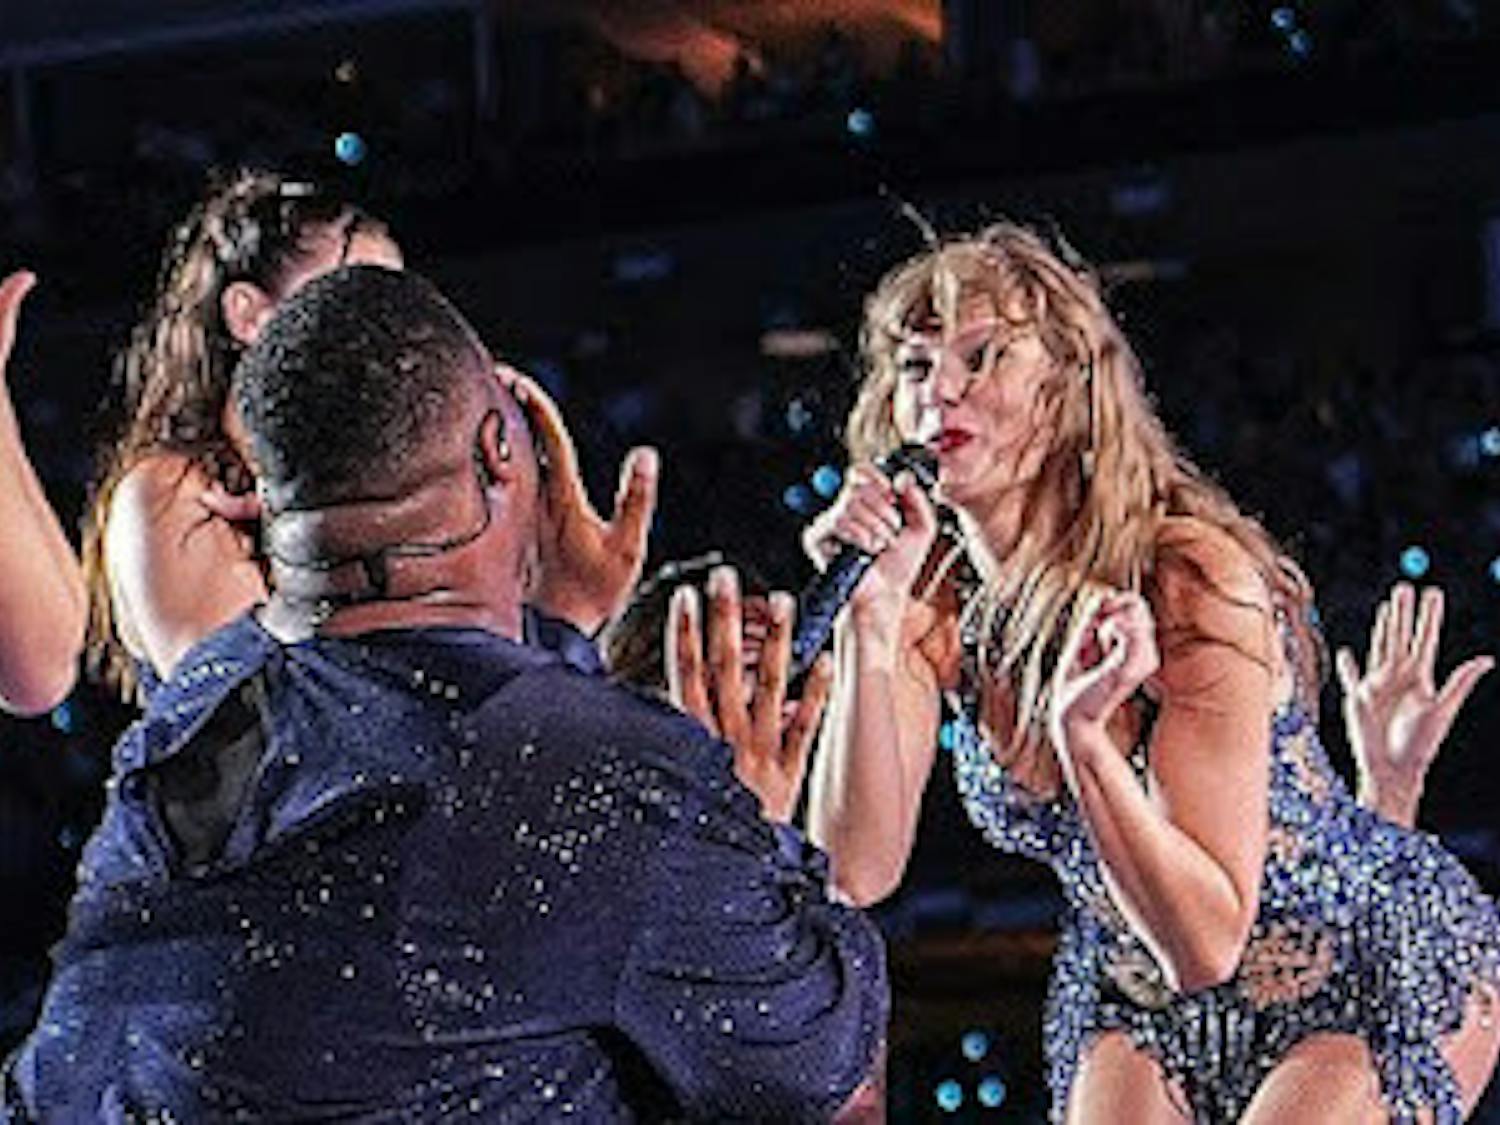 Issues arose resulting in death and injuries at the Brazil leg of Taylor Swift’s Eras Tour. (Taylor Swift The Eras Tour Midnights Era Set 2023 by Paolo V, courtesy of Wikimedia Commons)